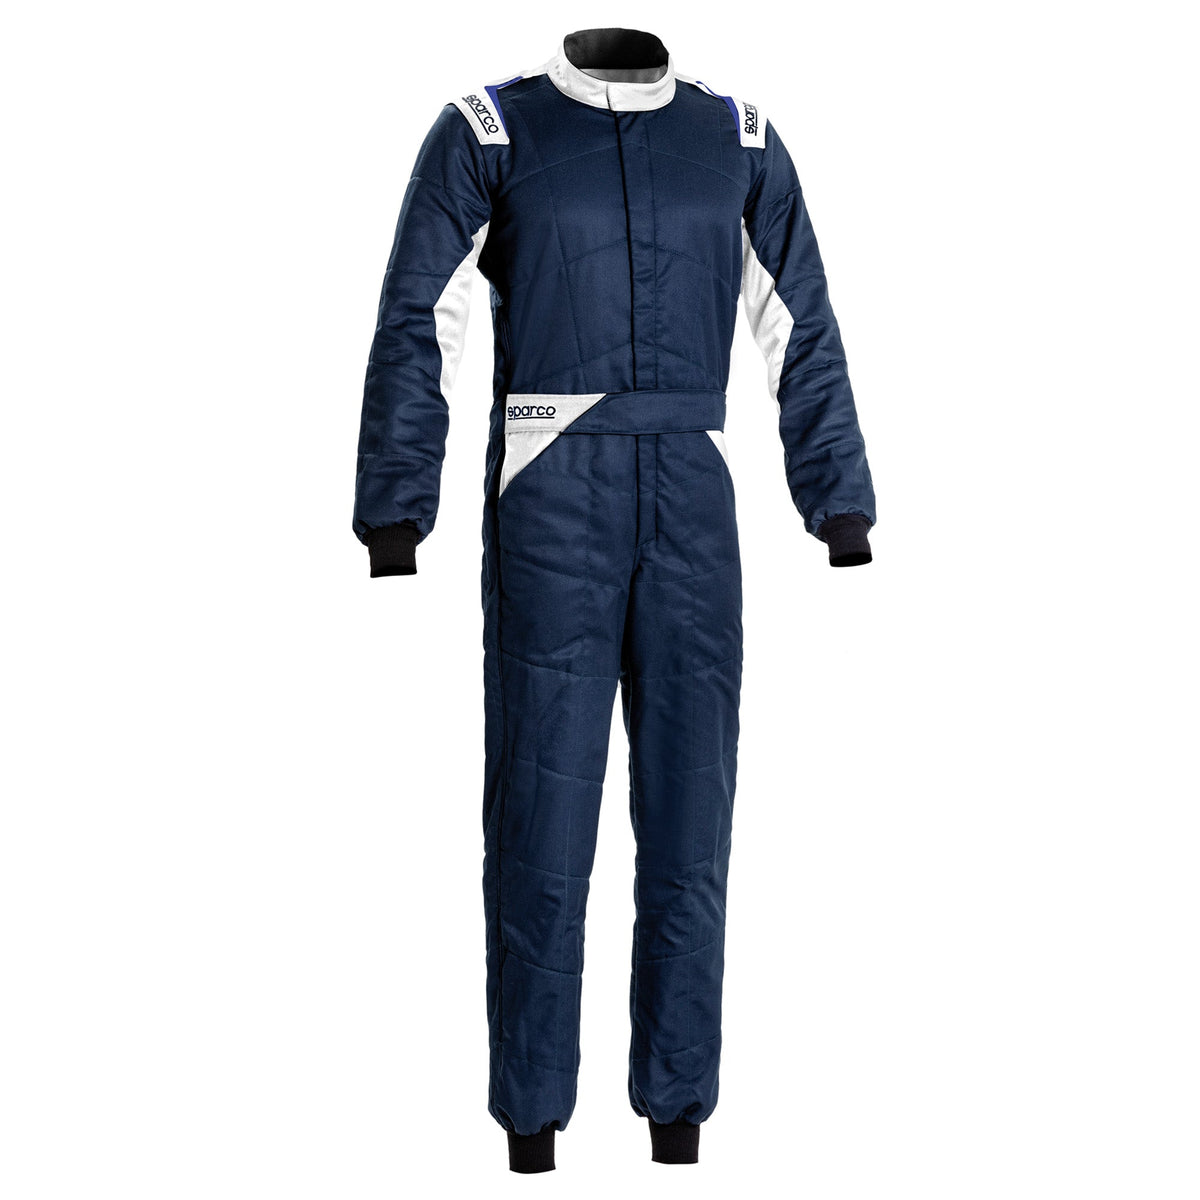 Sparco Sprint Racing Suit - Navy/White